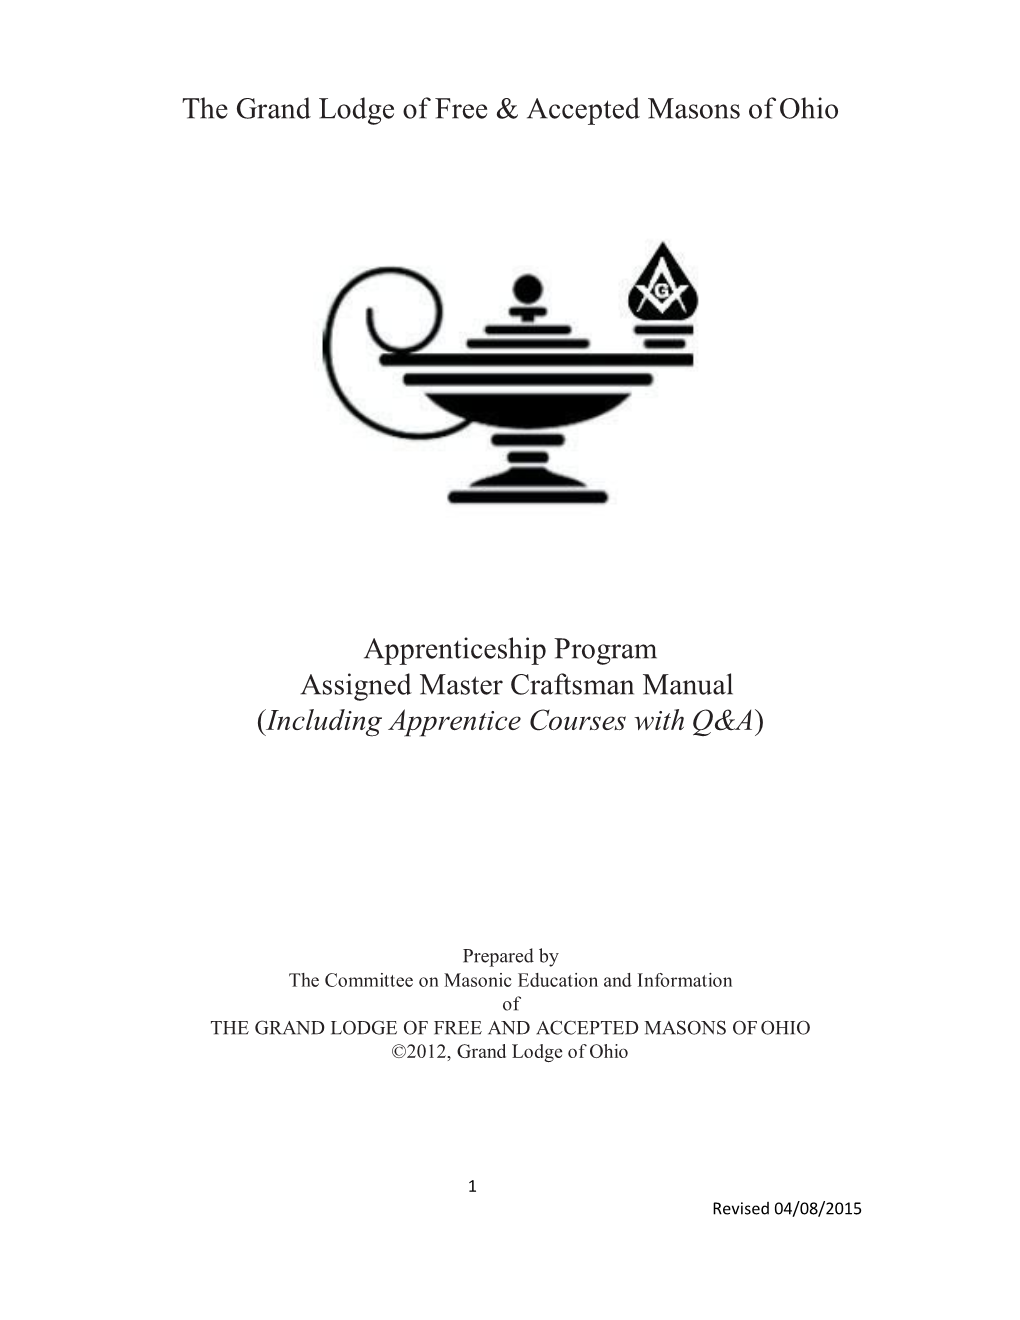 The Grand Lodge of Free & Accepted Masons of Ohio Apprenticeship Program Assigned Master Craftsman Manual (Including Apprent